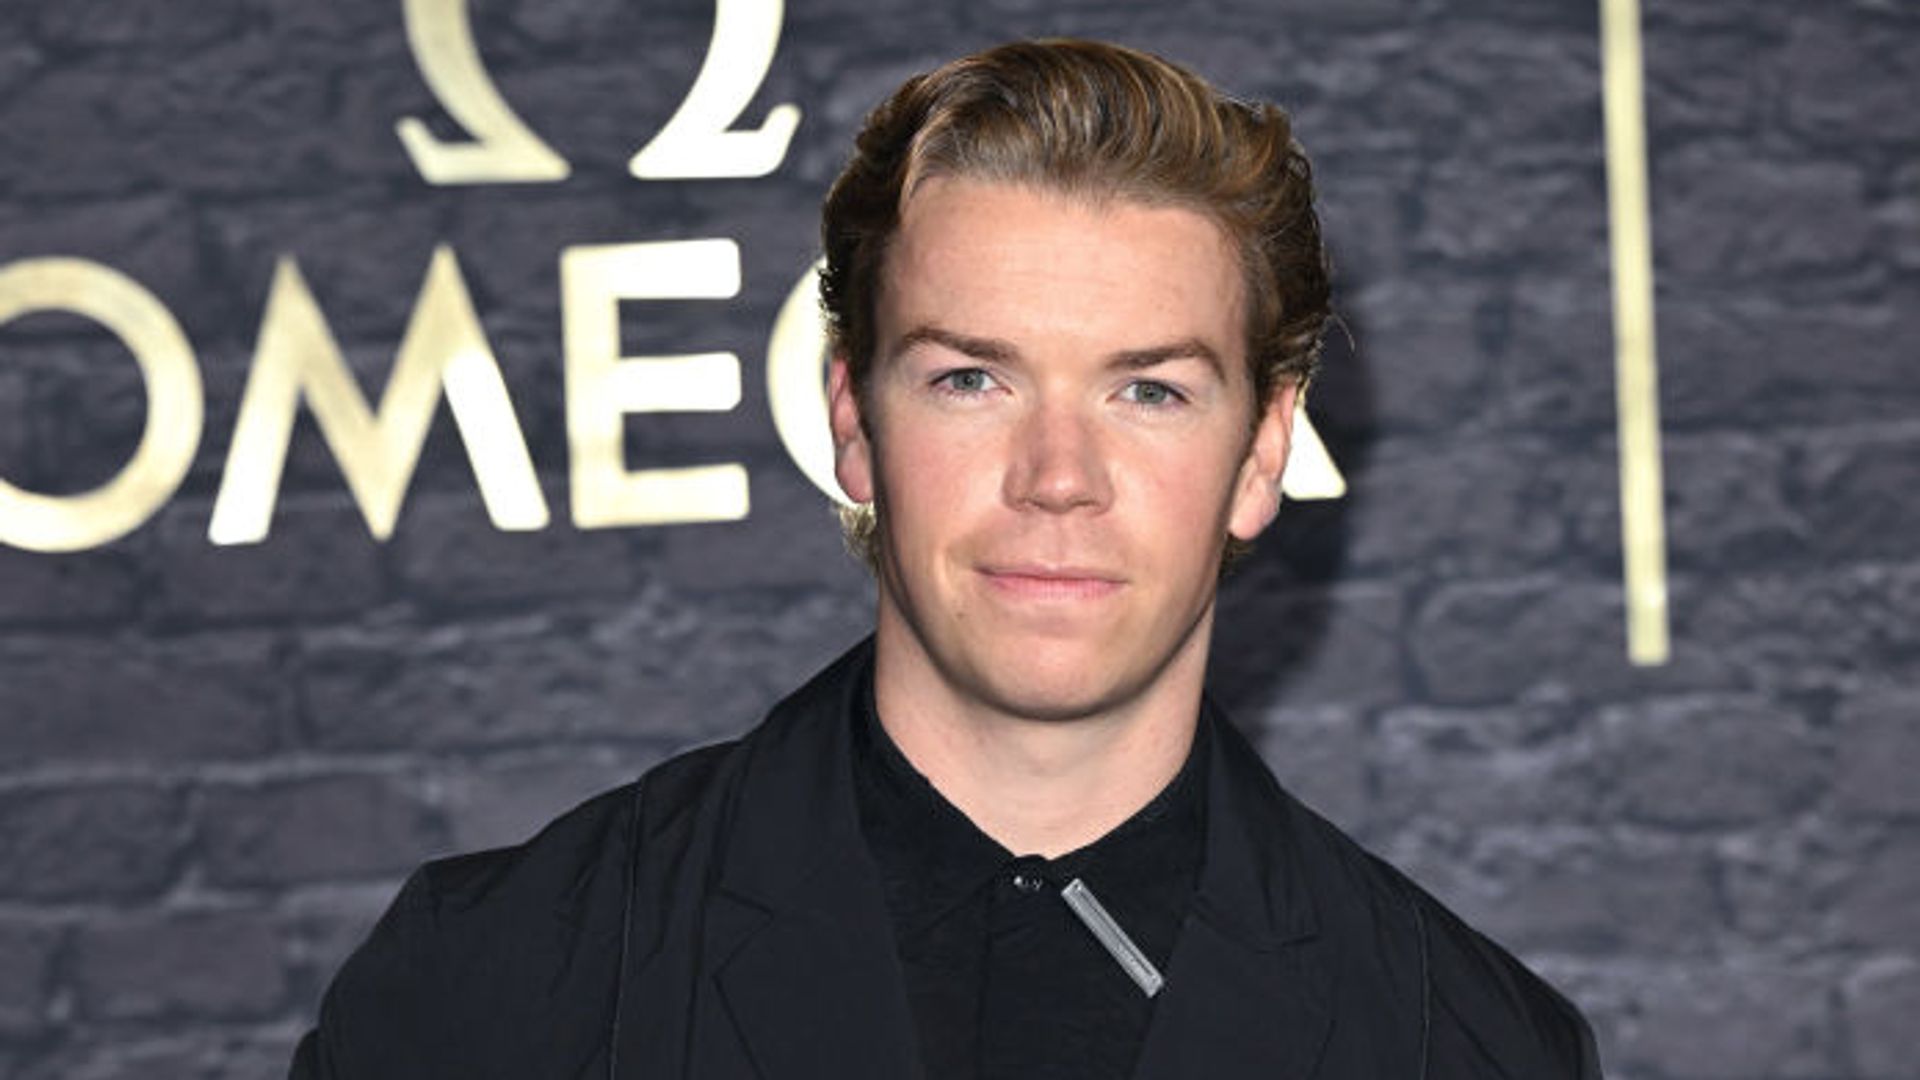 Will Poulter wears a black suit as he attends a photocall for "60 Years of James Bond" on November 23, 2022